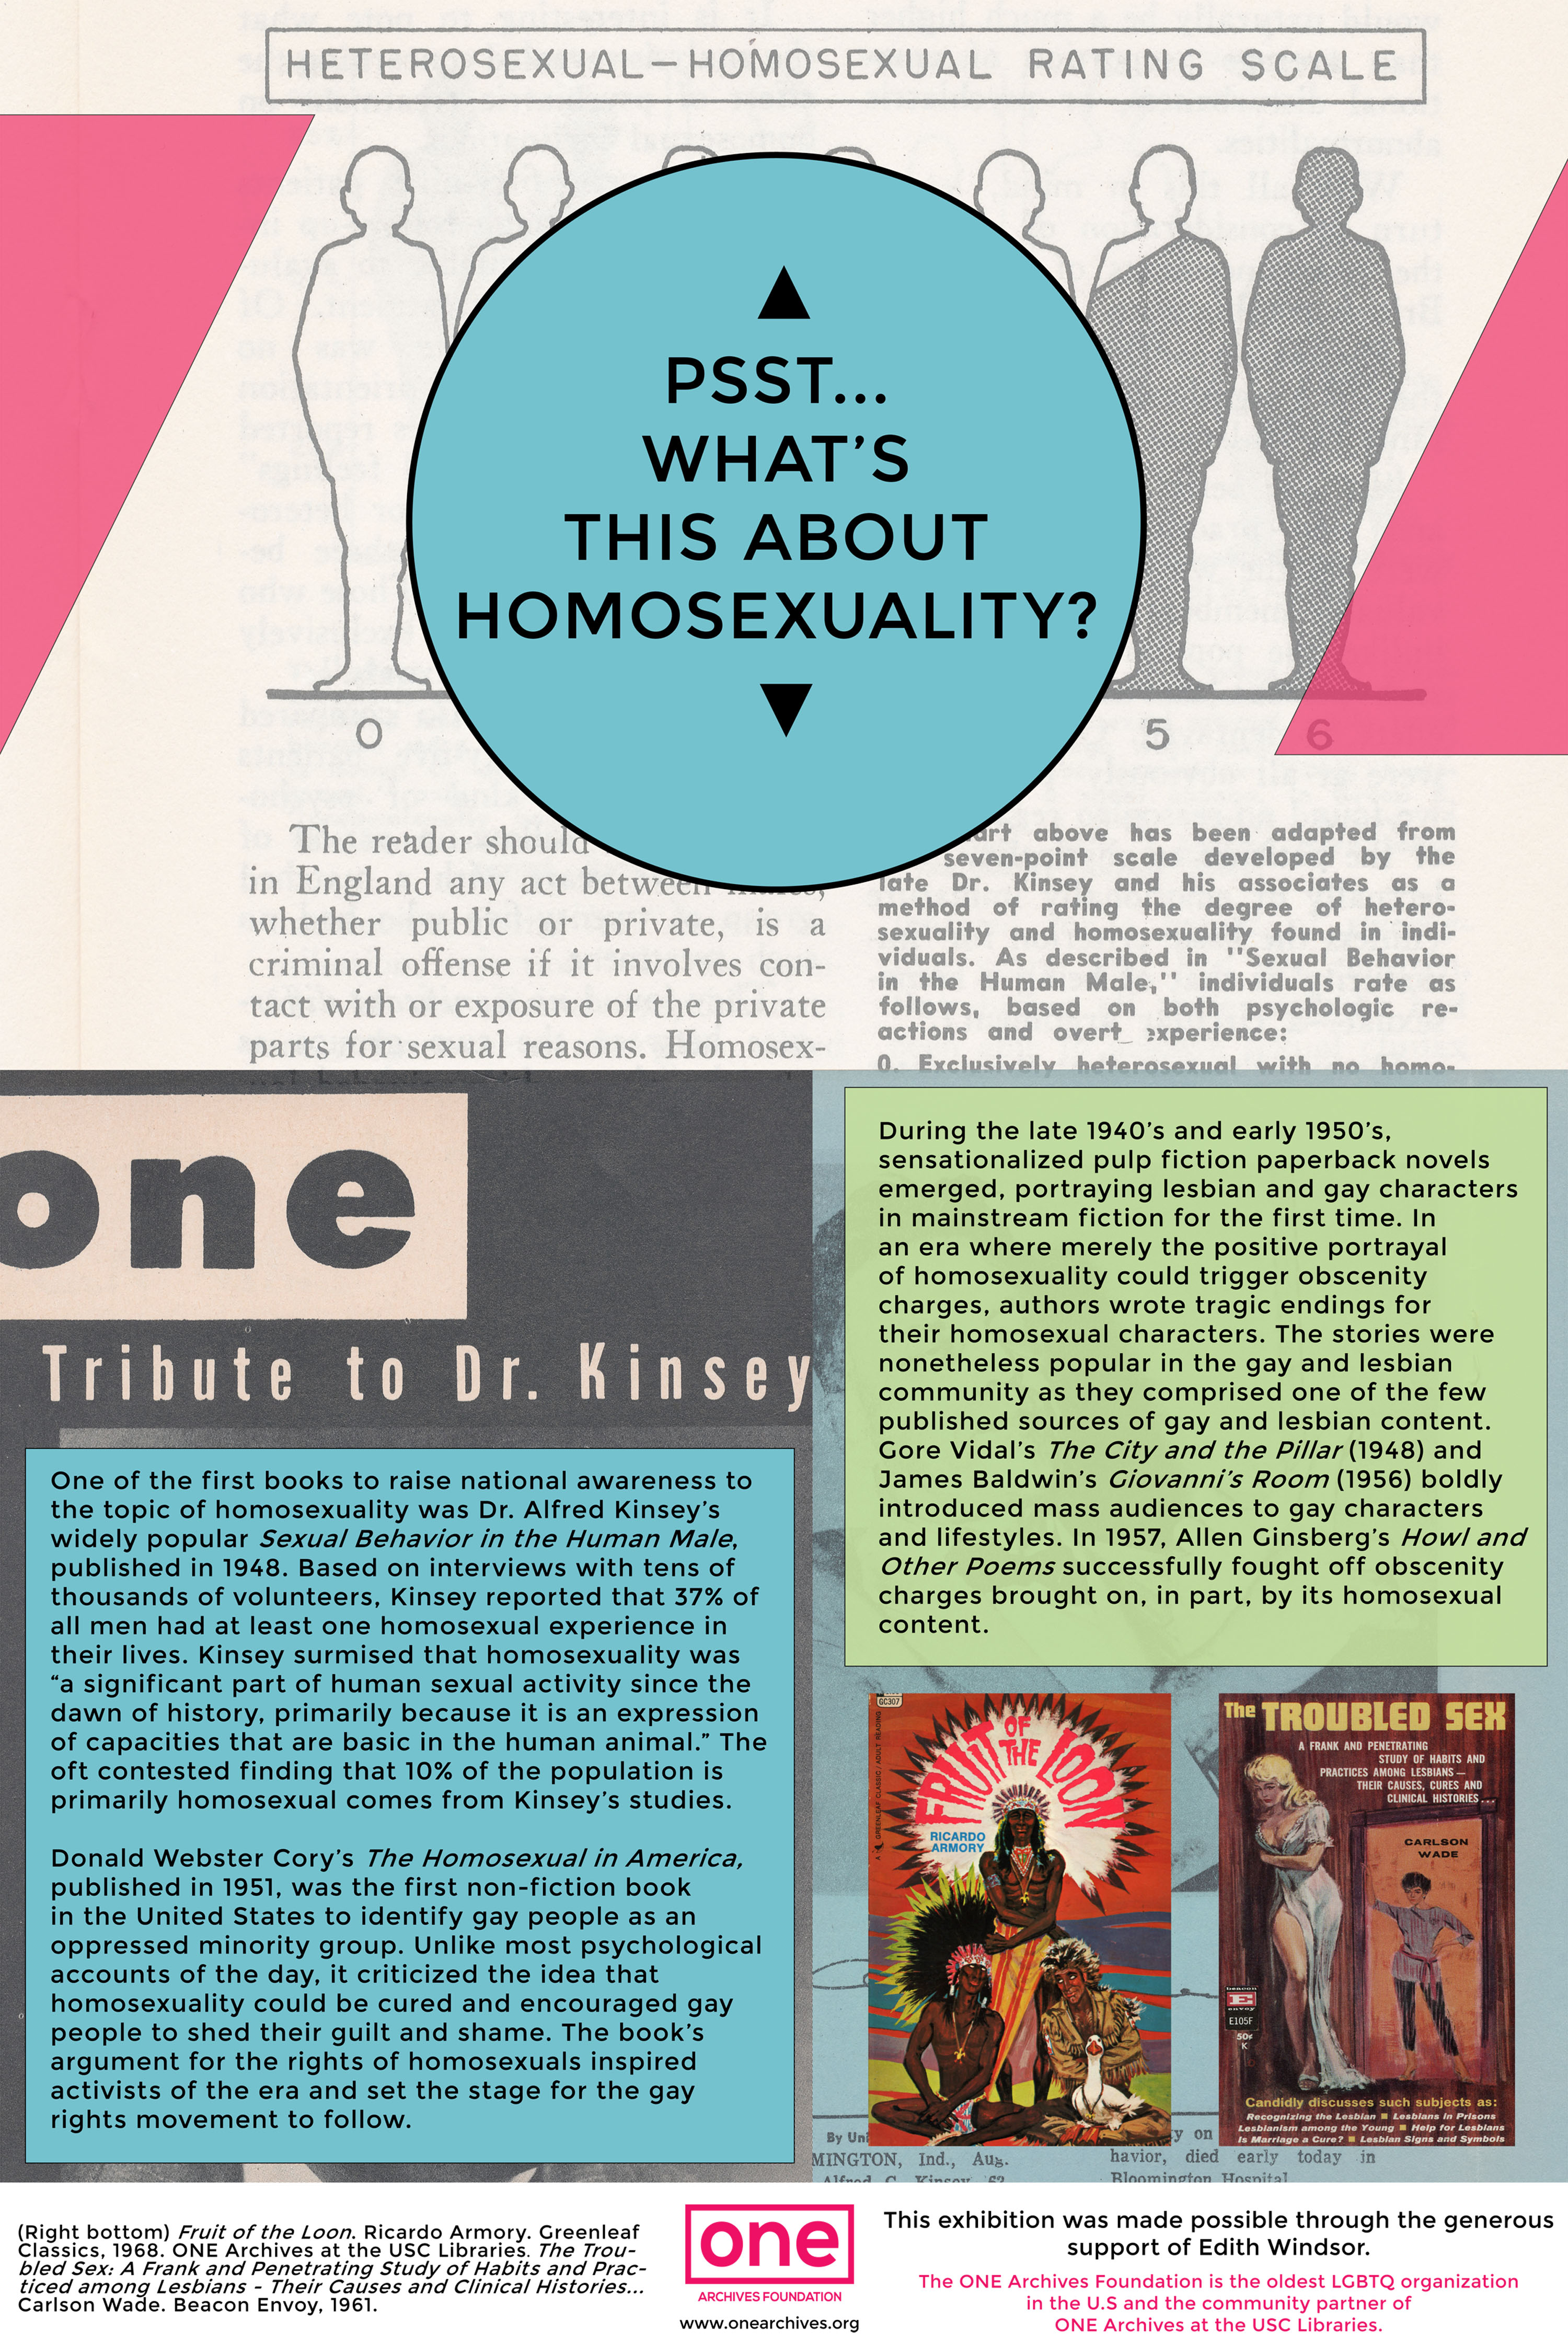 History of homosexuality in the world